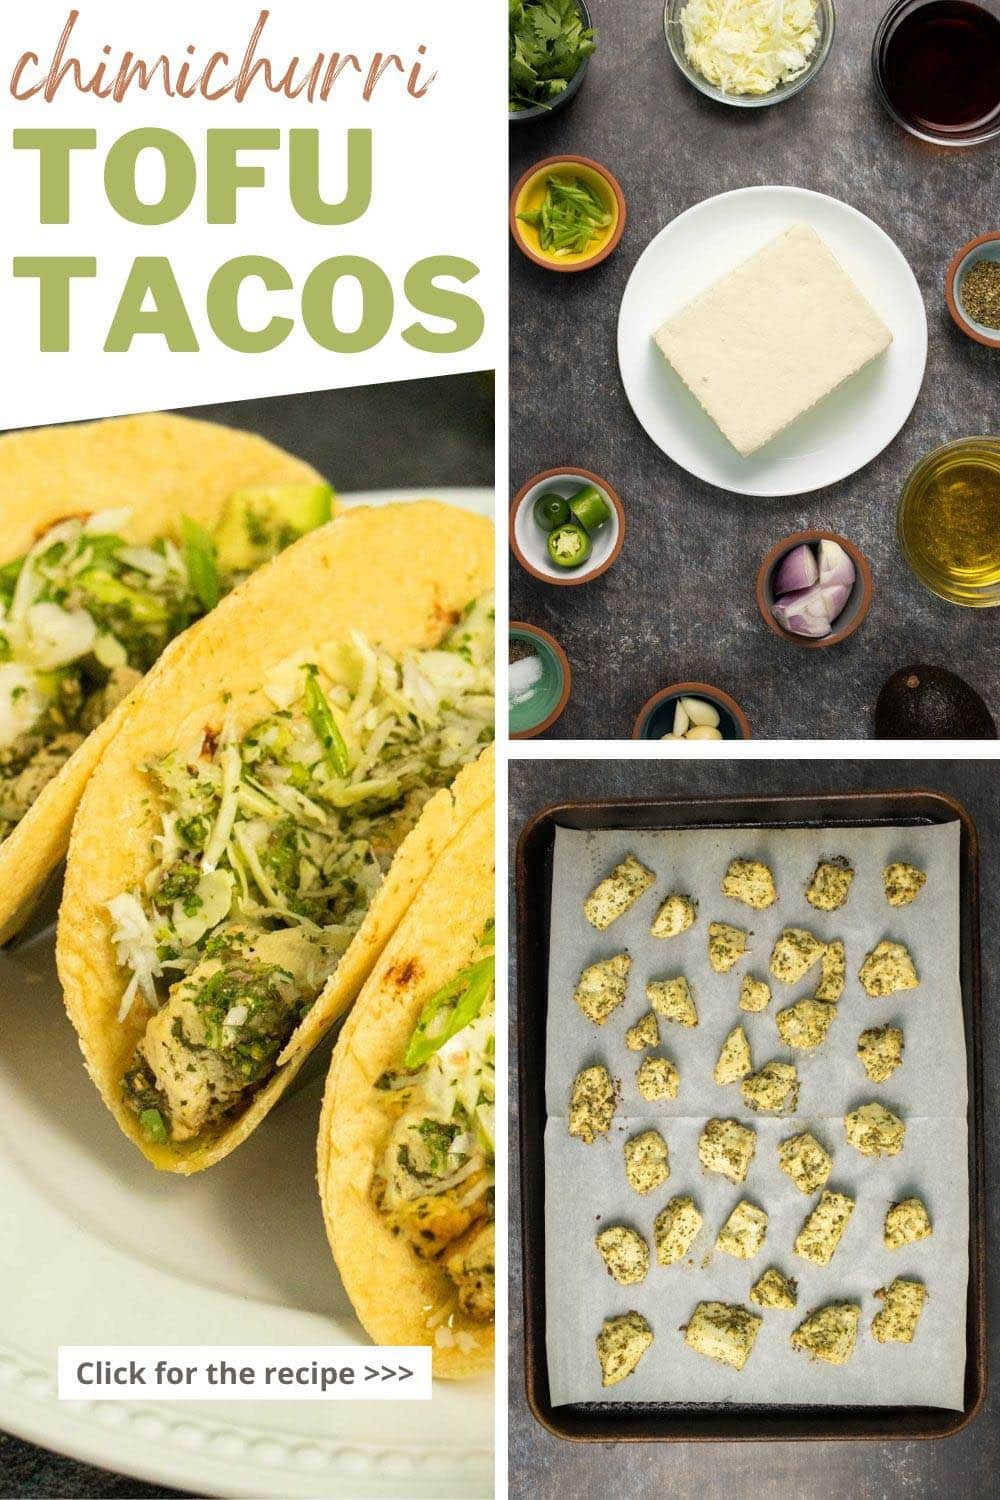 image collage of vegan tacos on a white plate with cabbage, avocado, and chimichurri sauce with picture of the ingredients and one of tofu on the baking sheet